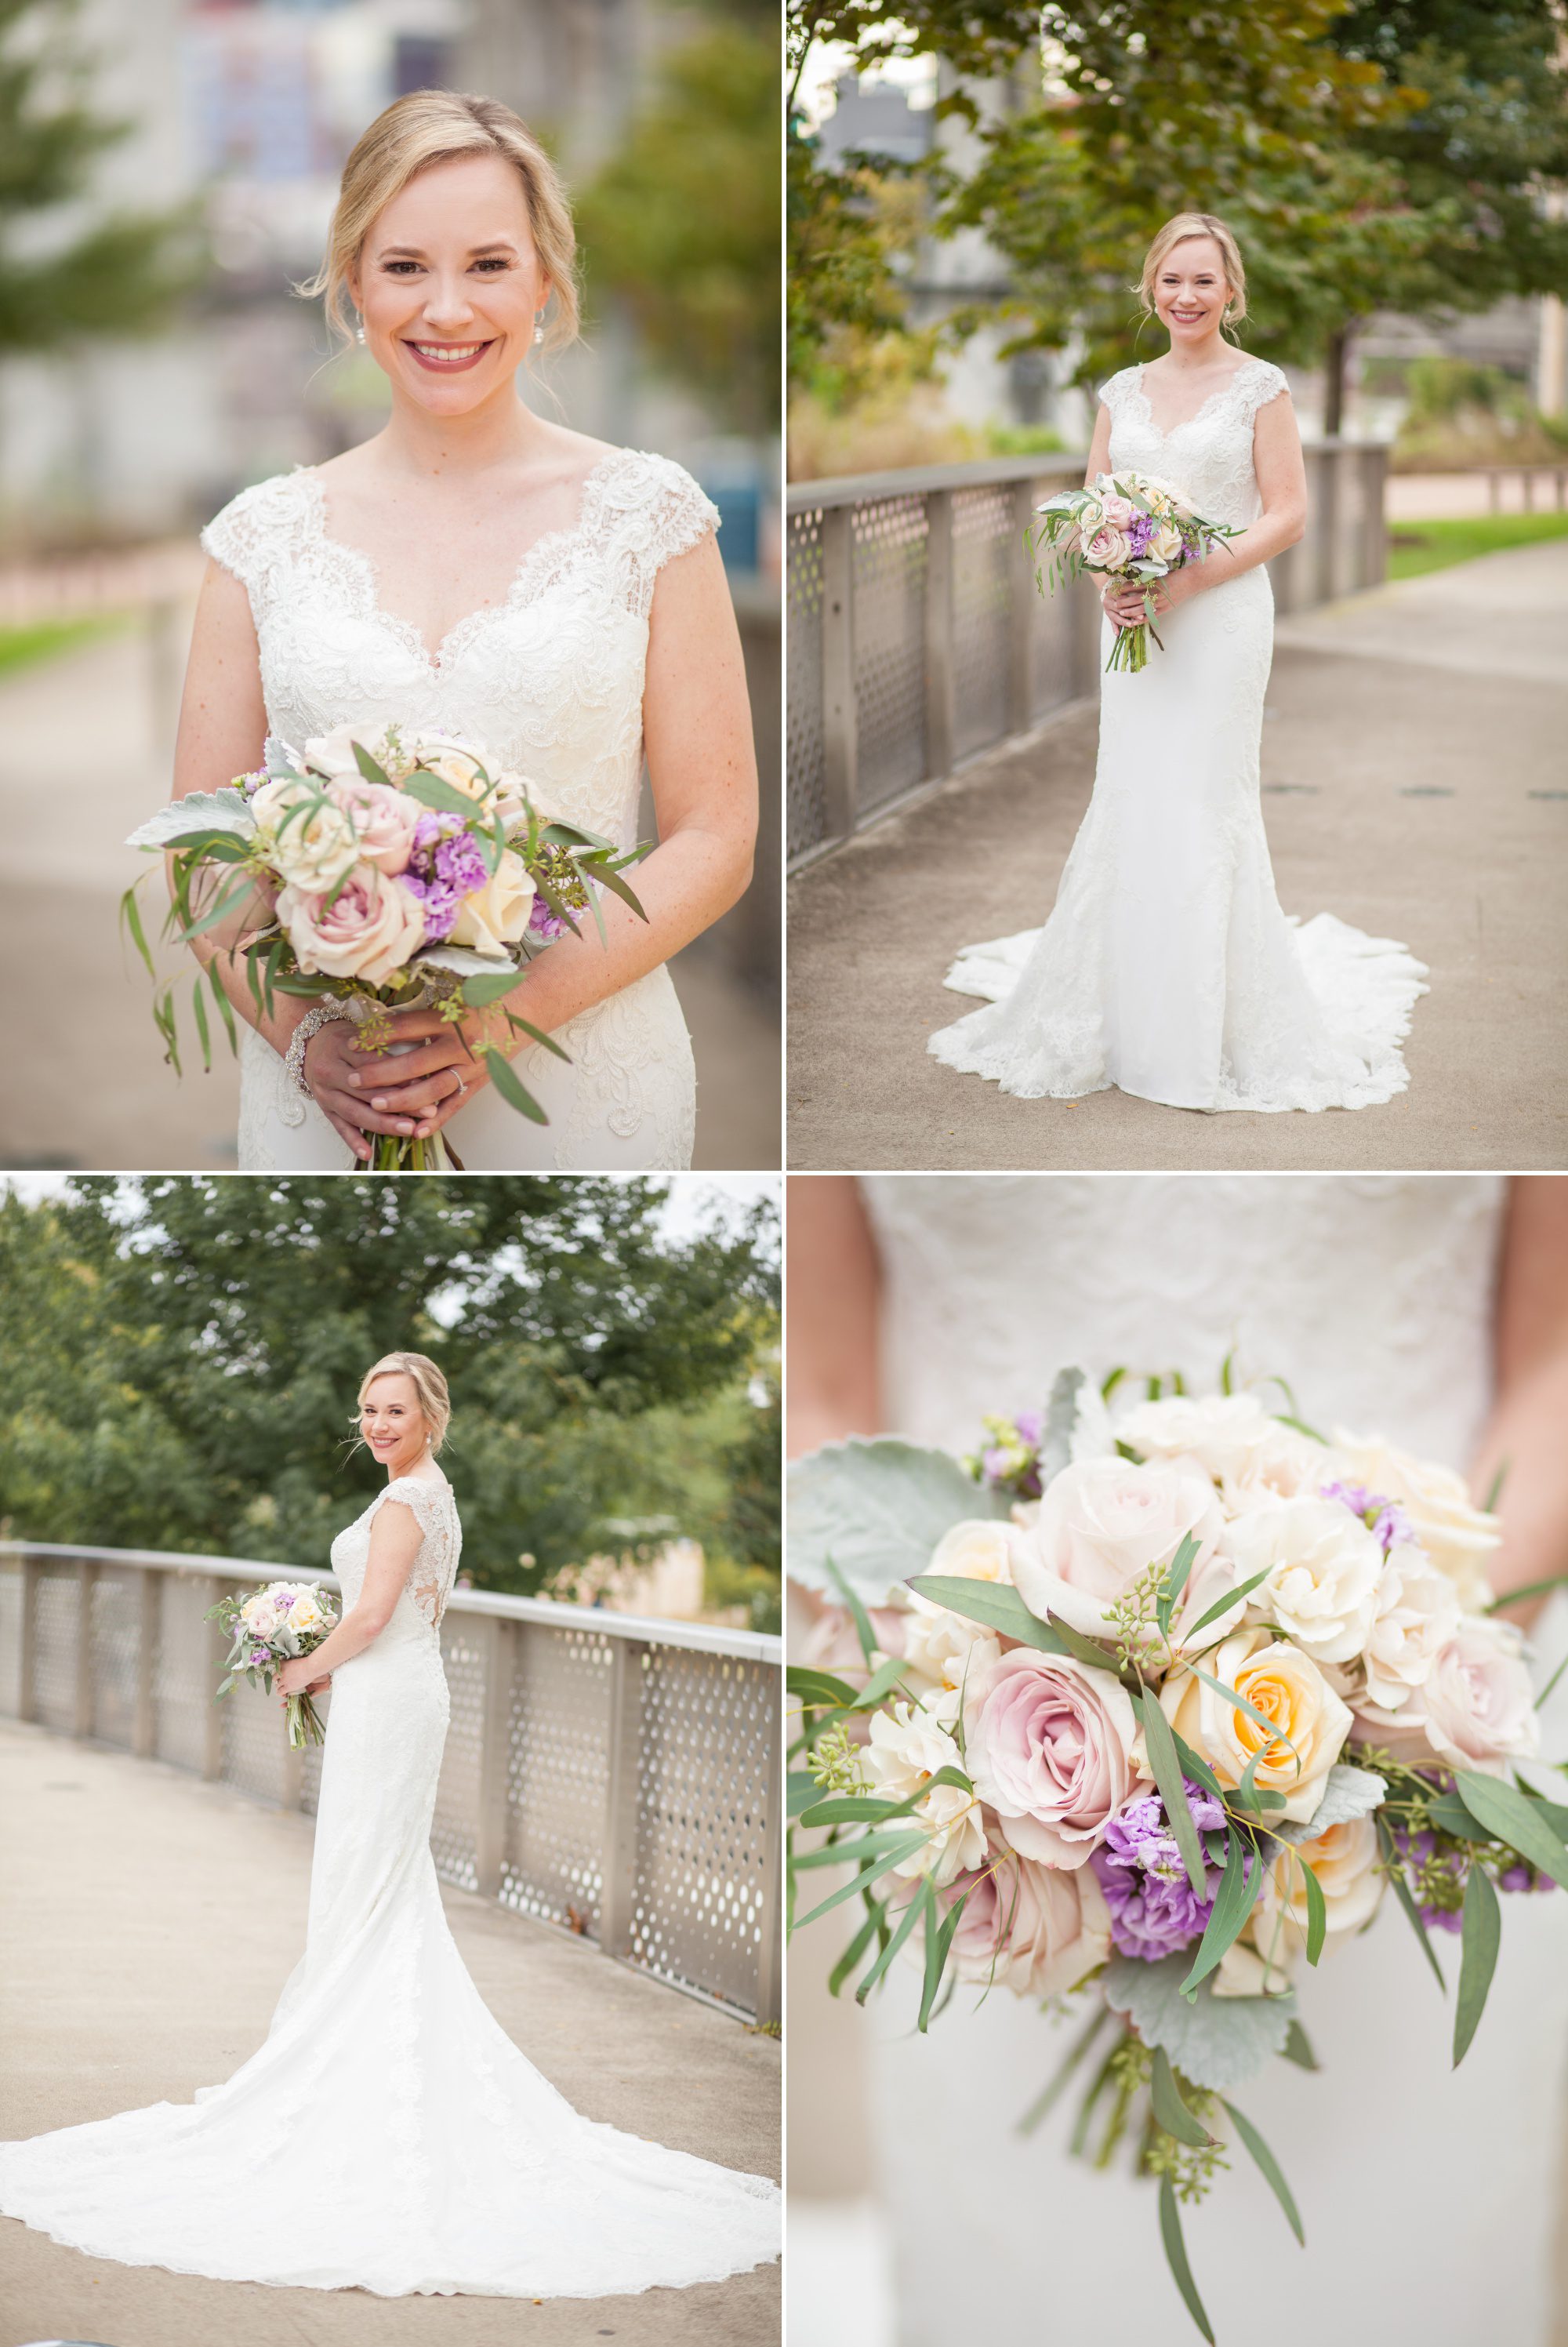 Bridal portraits before wedding photography at Musicians Hall of Fame in Nashville TN photos by Krista Lee 